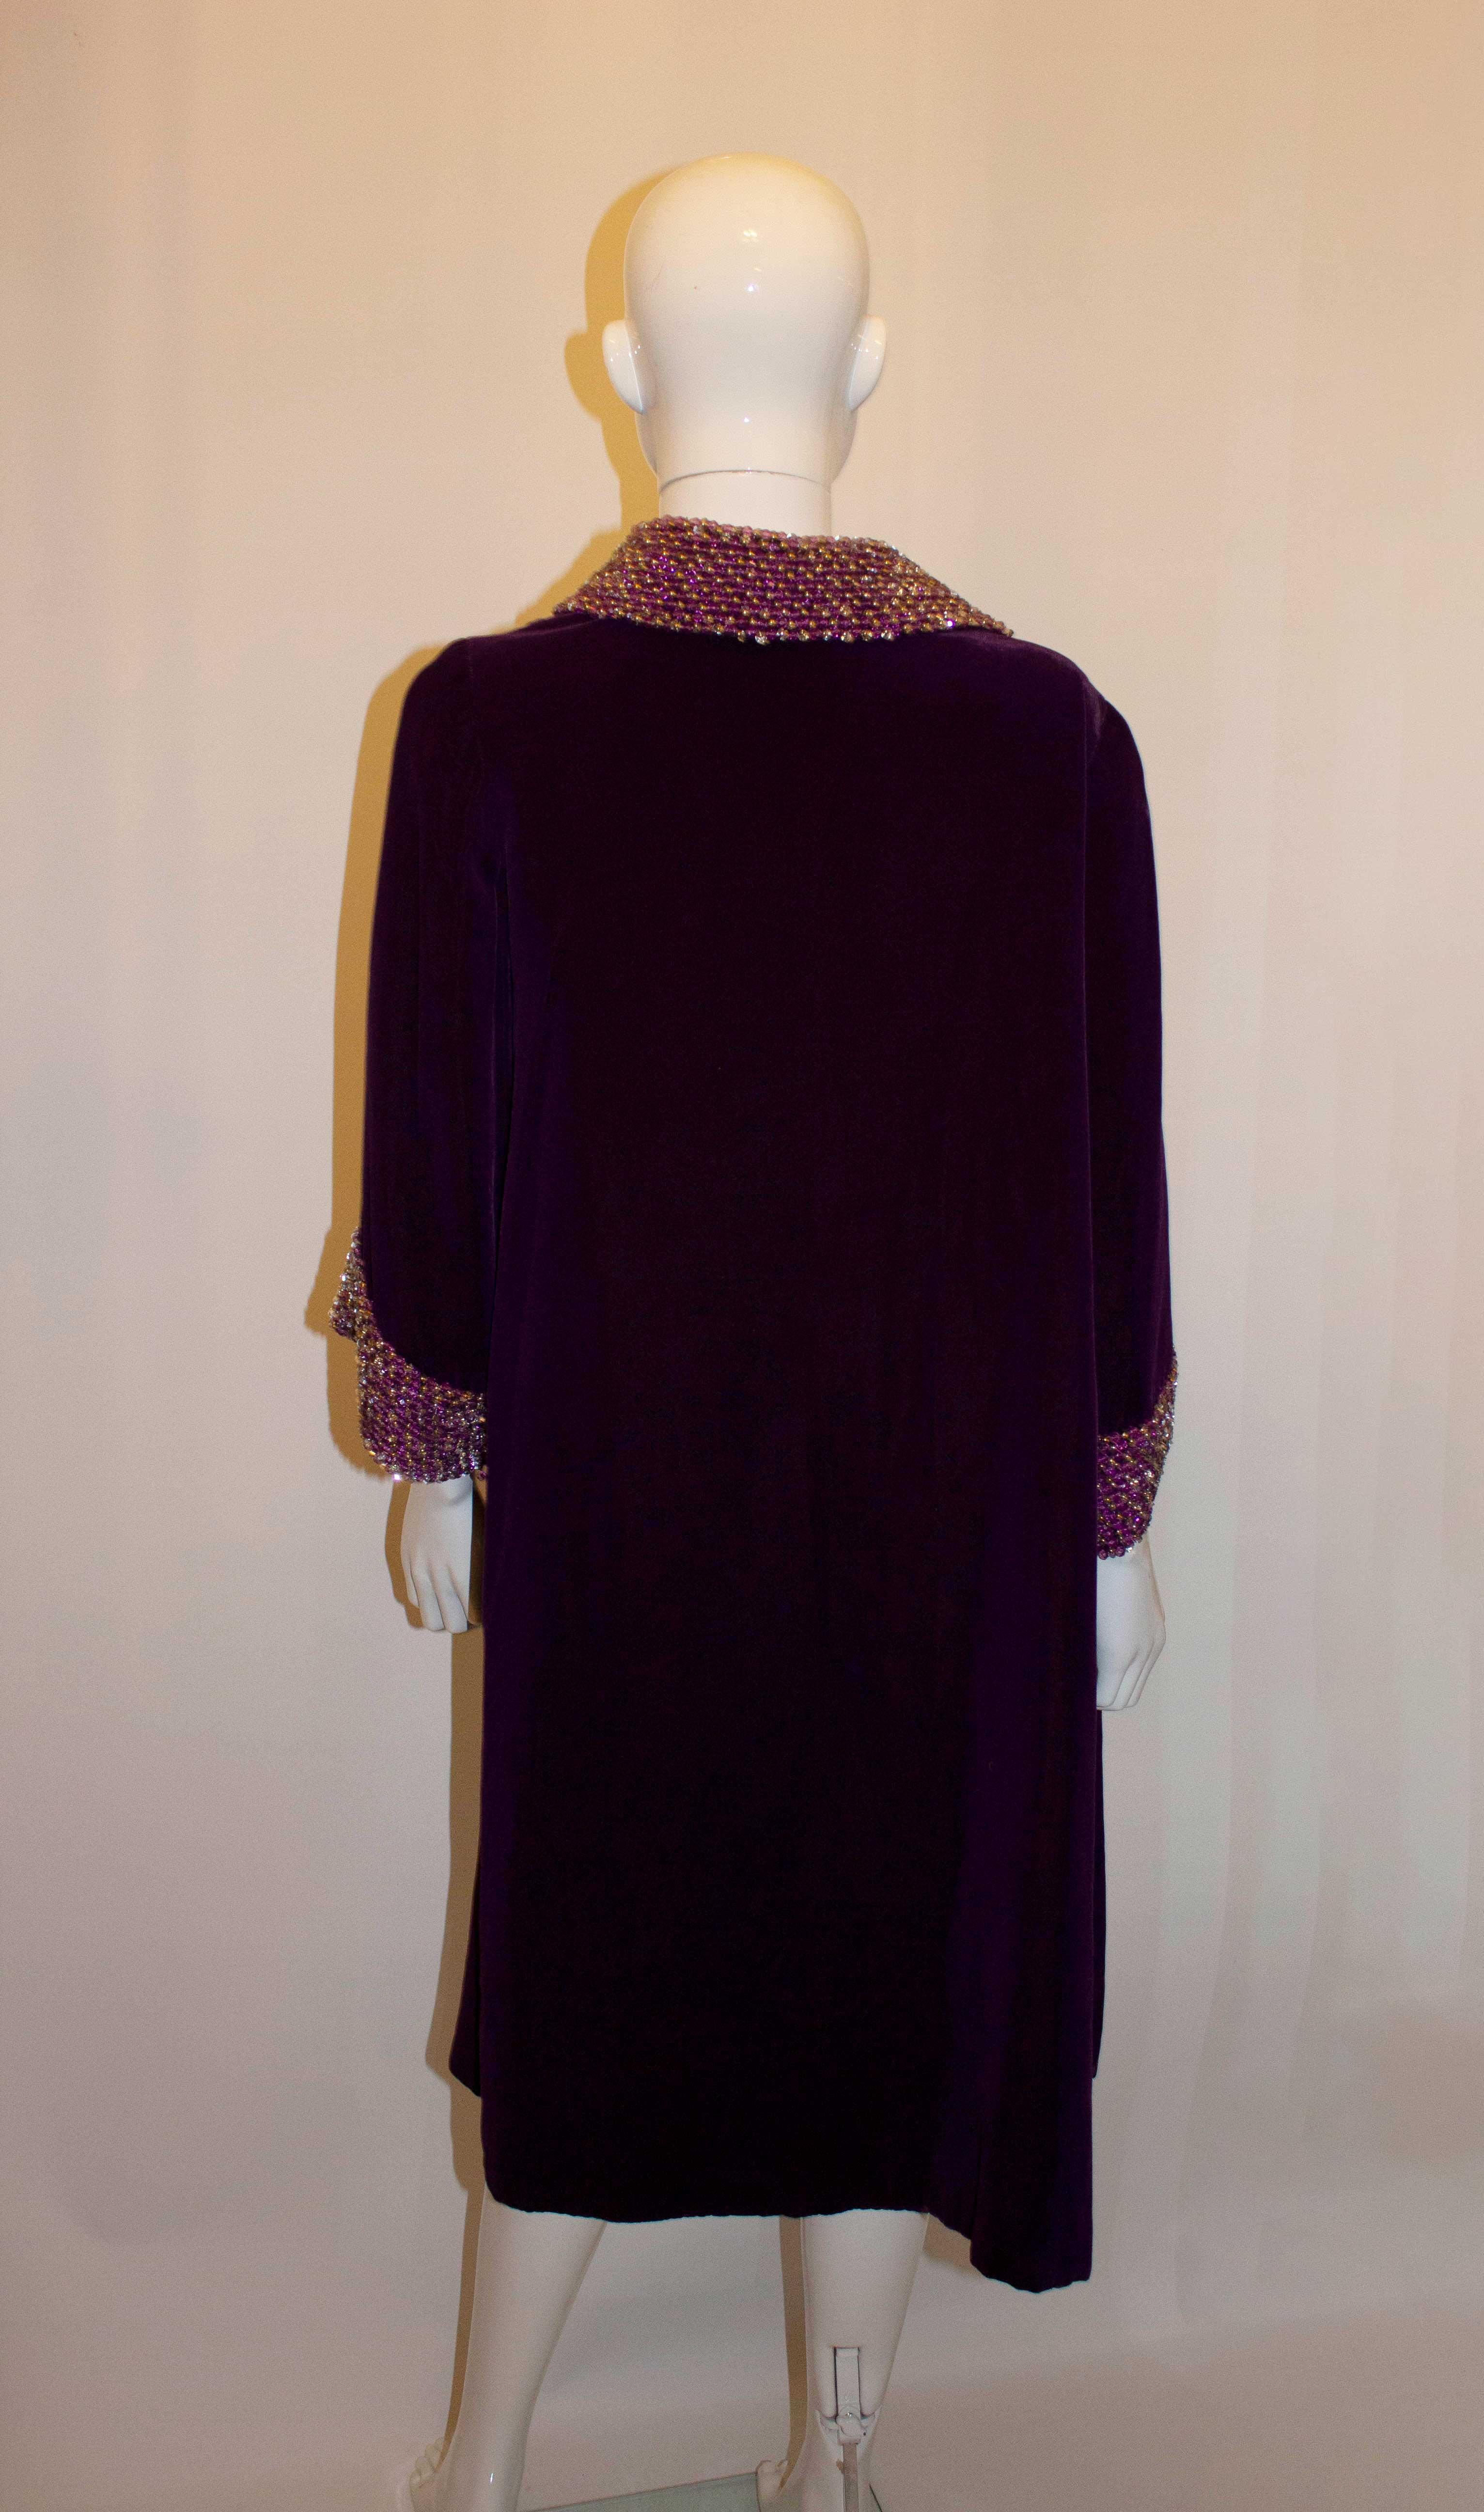 A stunning vintage evening coat in a purple velvet, with decorative collar and cuffs. The coat is fully lined. Measurments Bust 35'', length 39'' plus a 3'' hem. 